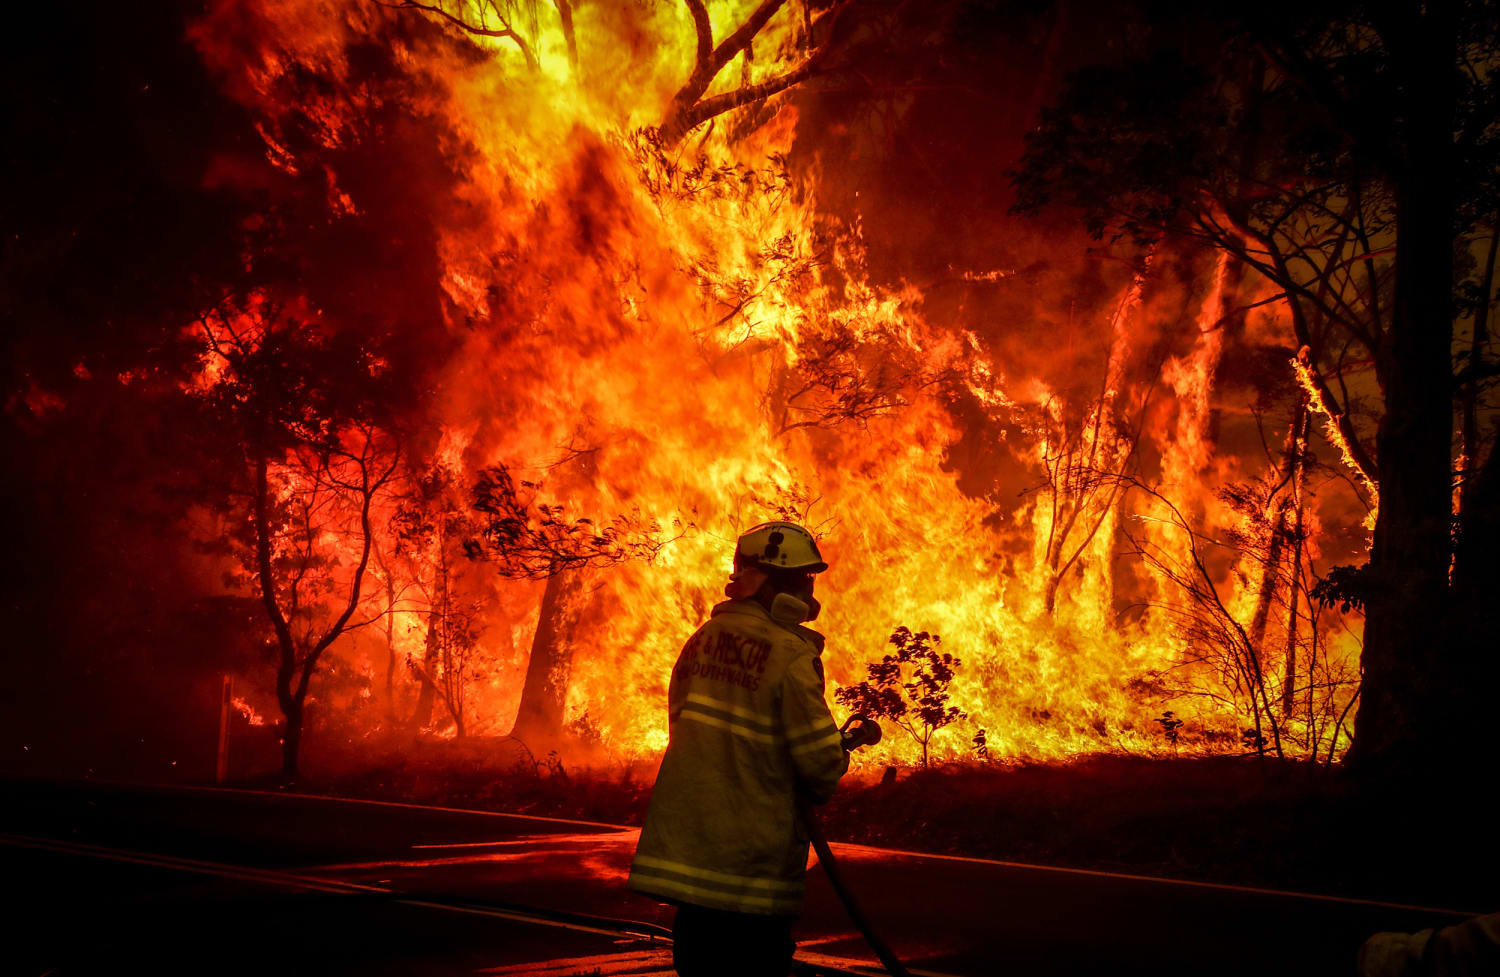 “It’s a very difficult and dangerous set of circumstances,” said Rural Fire Service Commissio...